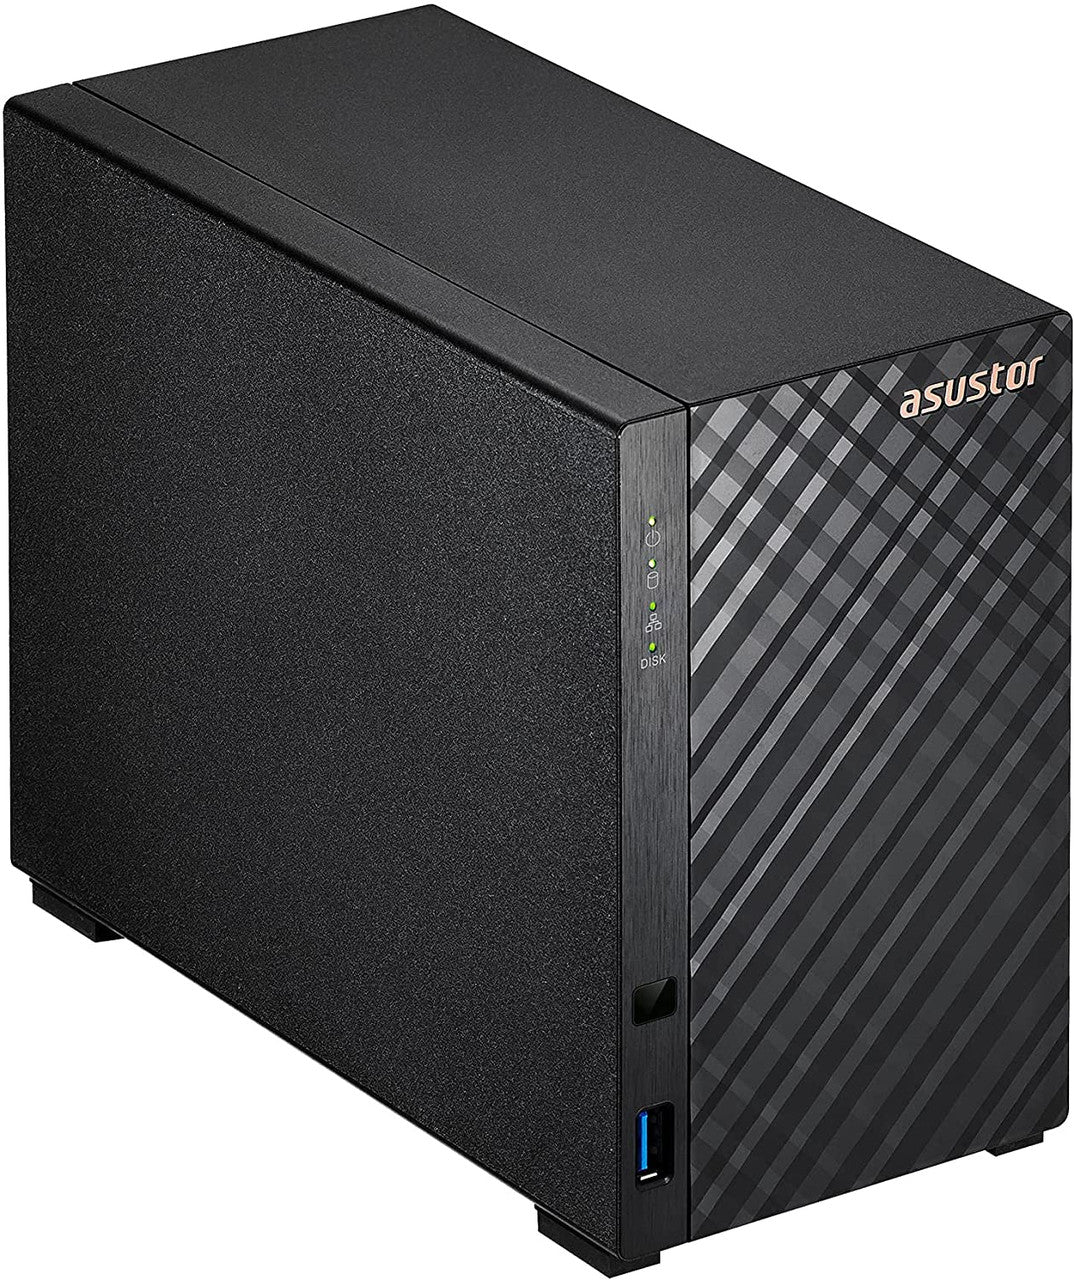 Asustor AS1102T 2-Bay Drivestor 2 NAS with 1GB RAM and 16TB (2x8TB) Seagate Ironwolf NAS Drives